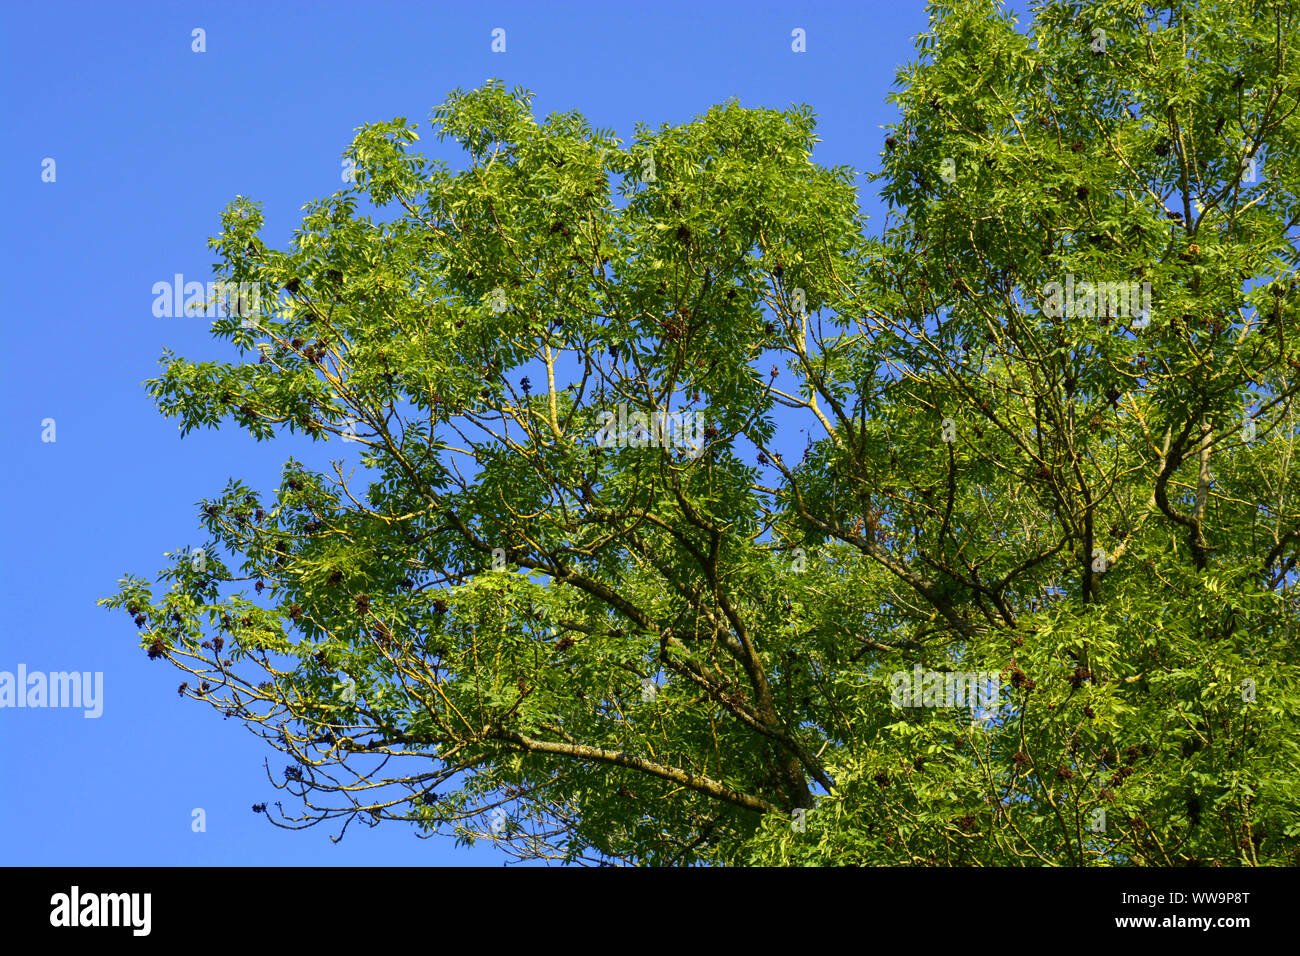 european ash tree with bright green branches, big Ash Tree or fraxinus excelsior in front of blue clear sky Stock Photo